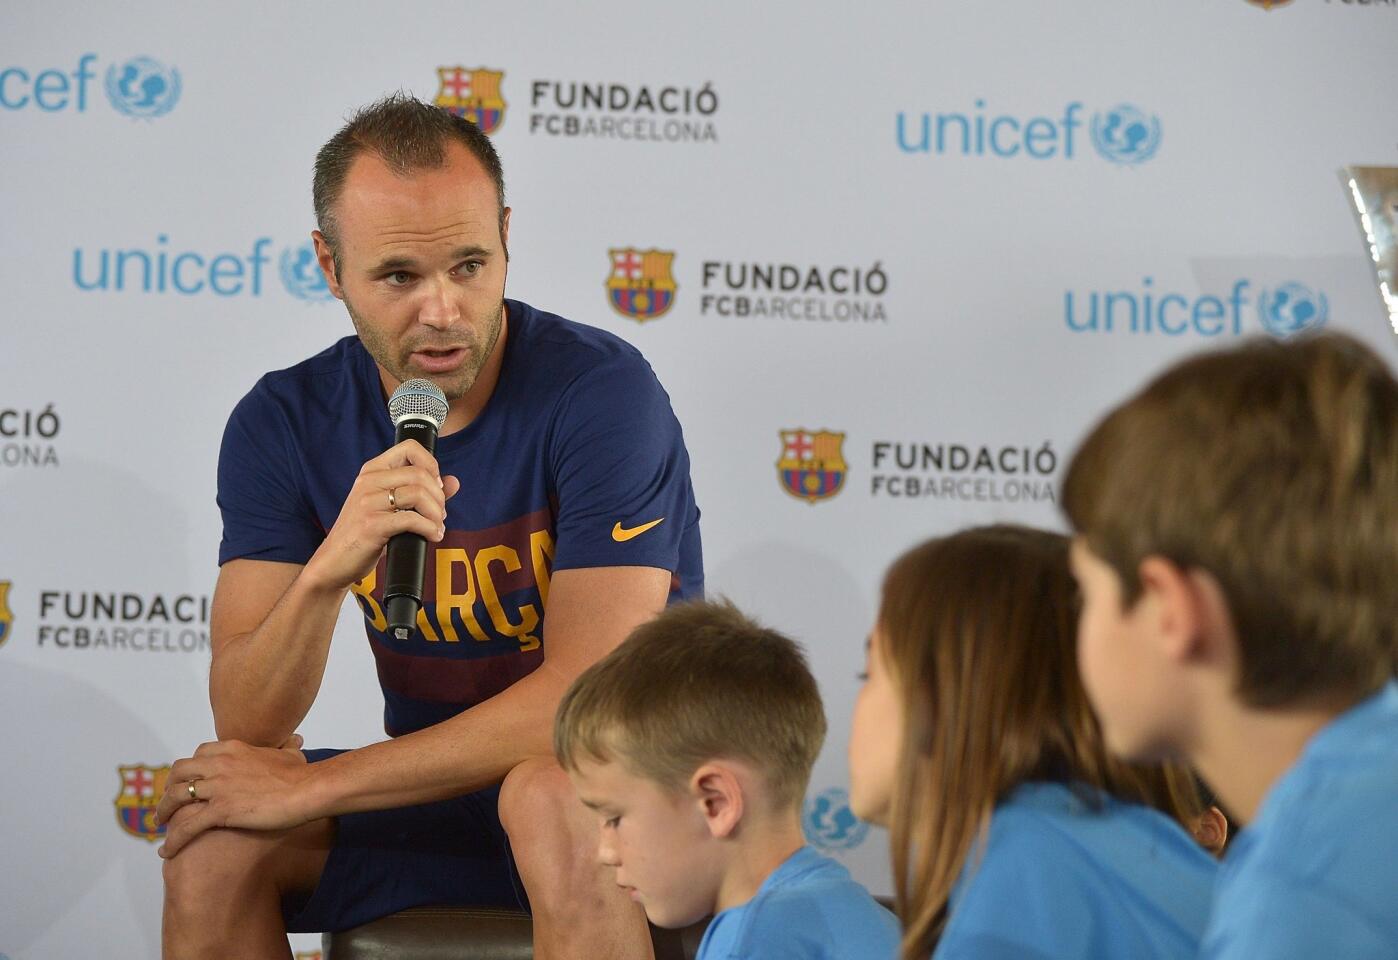 UNICEF And FC Barcelona Host An Event Where Children Talk About Empowering Lives Through Sport With FCB Players